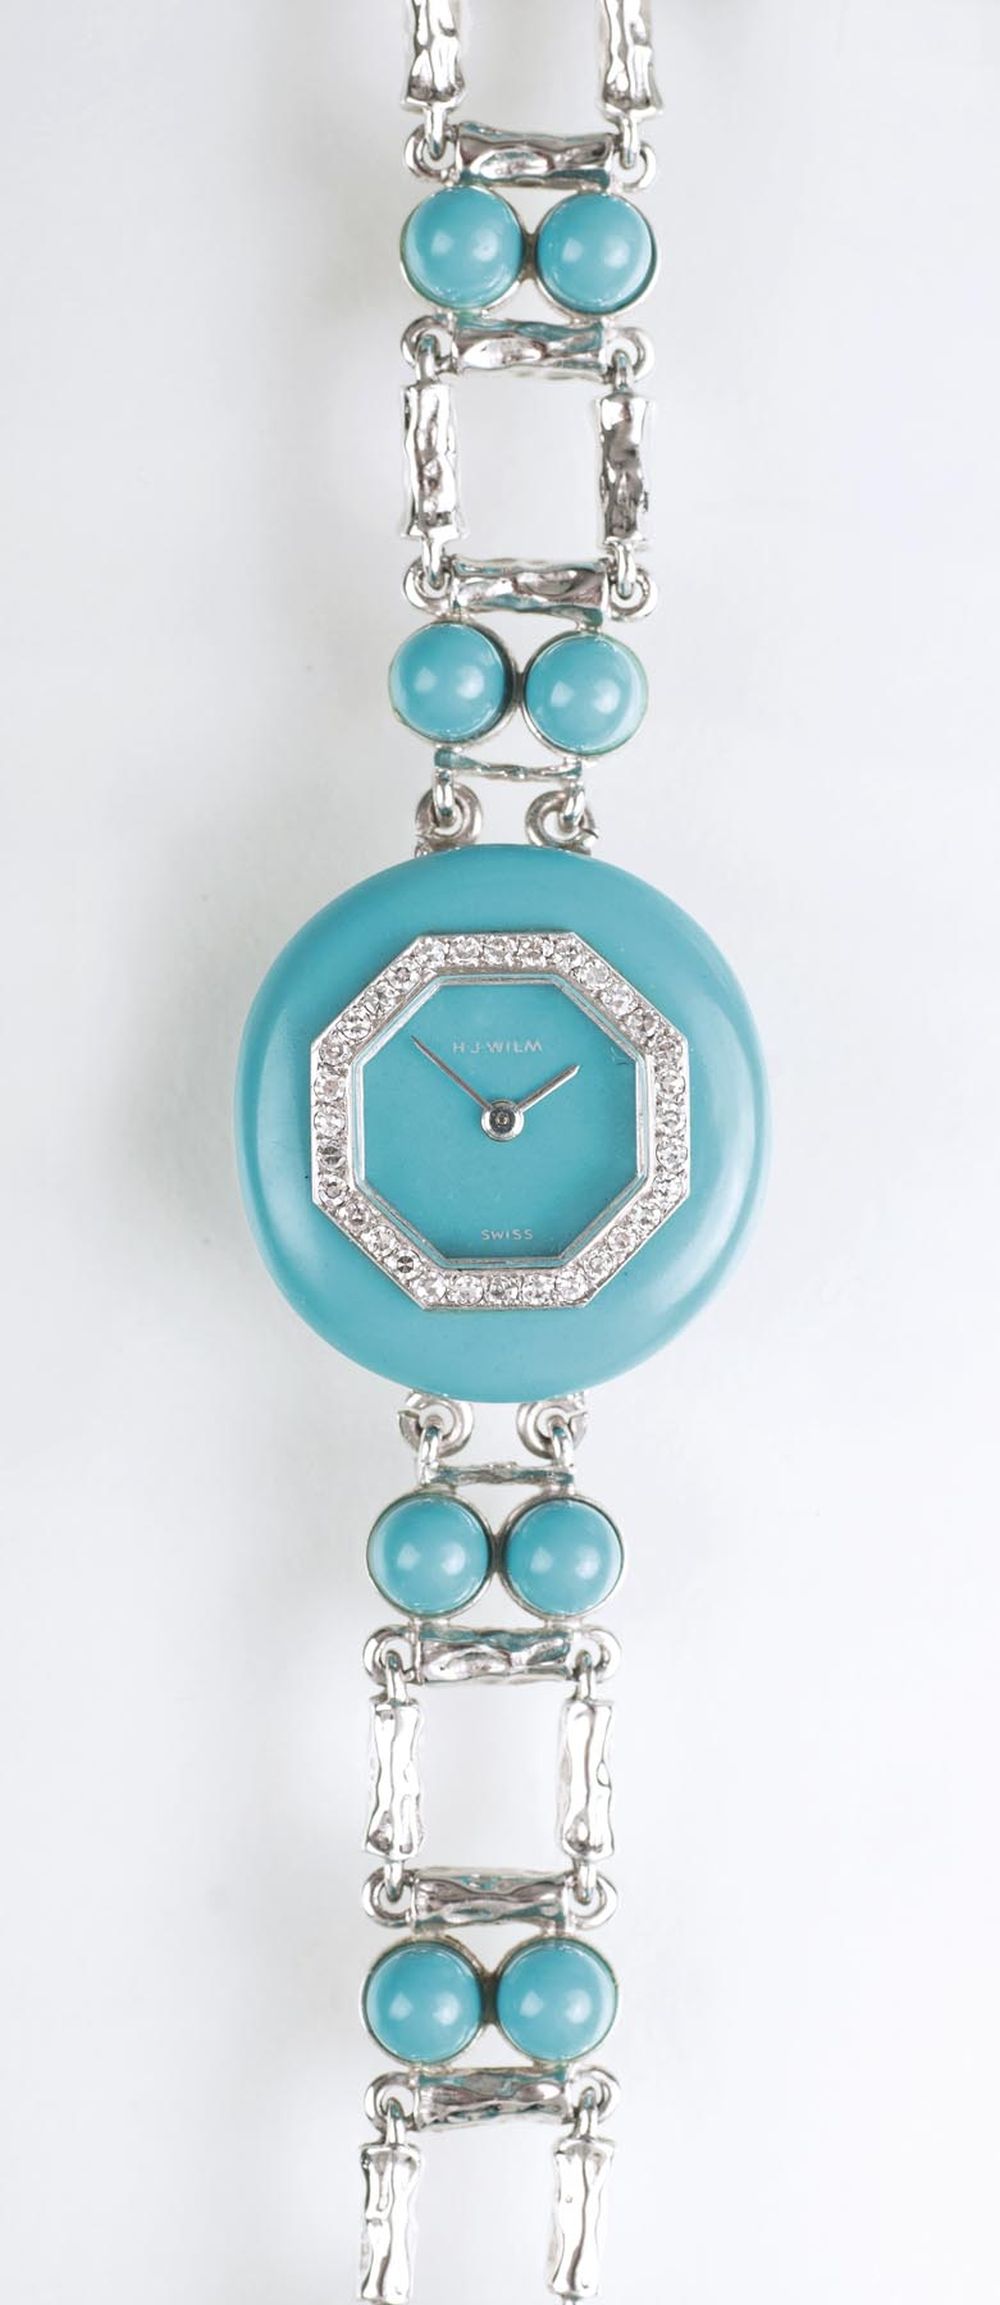 A Vintage Ladie's Wristwatch with turquoise and diamonds by Jeweller Wilm